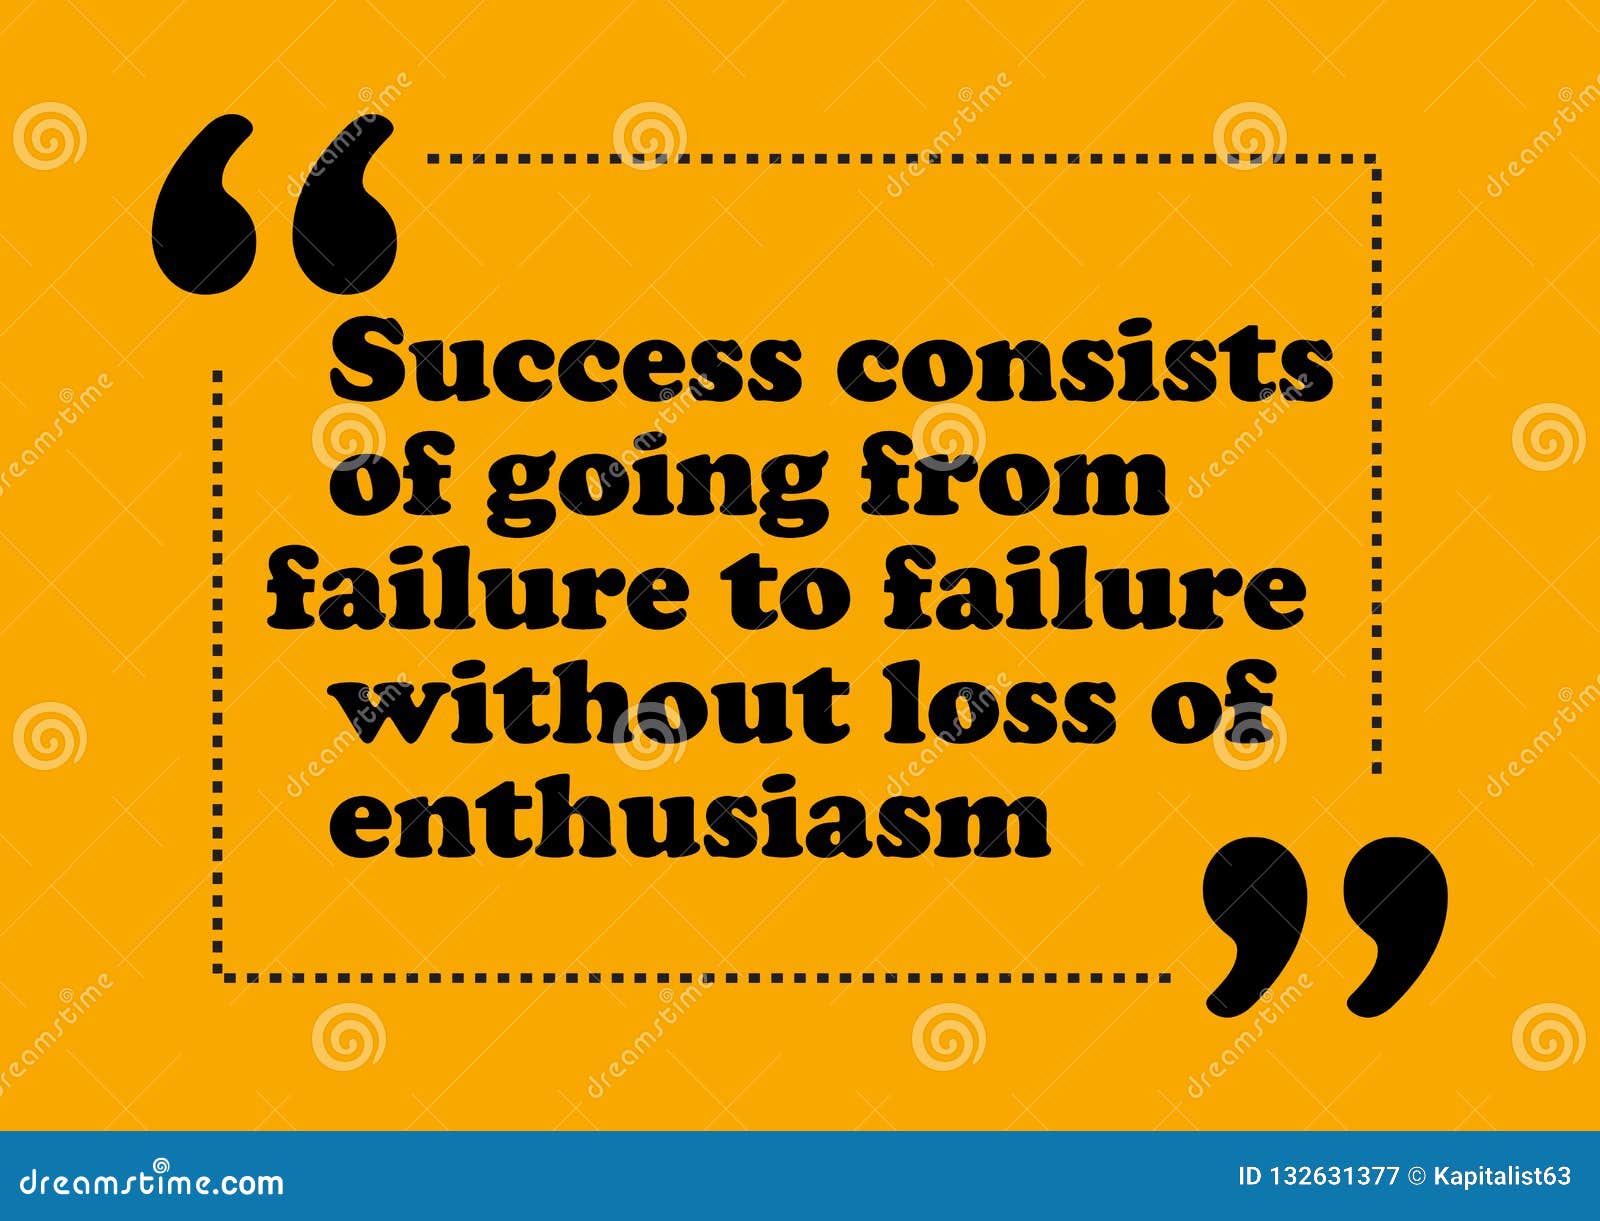 success consists of going from failure to failure without loss of enthusiasm inspirational quote business card